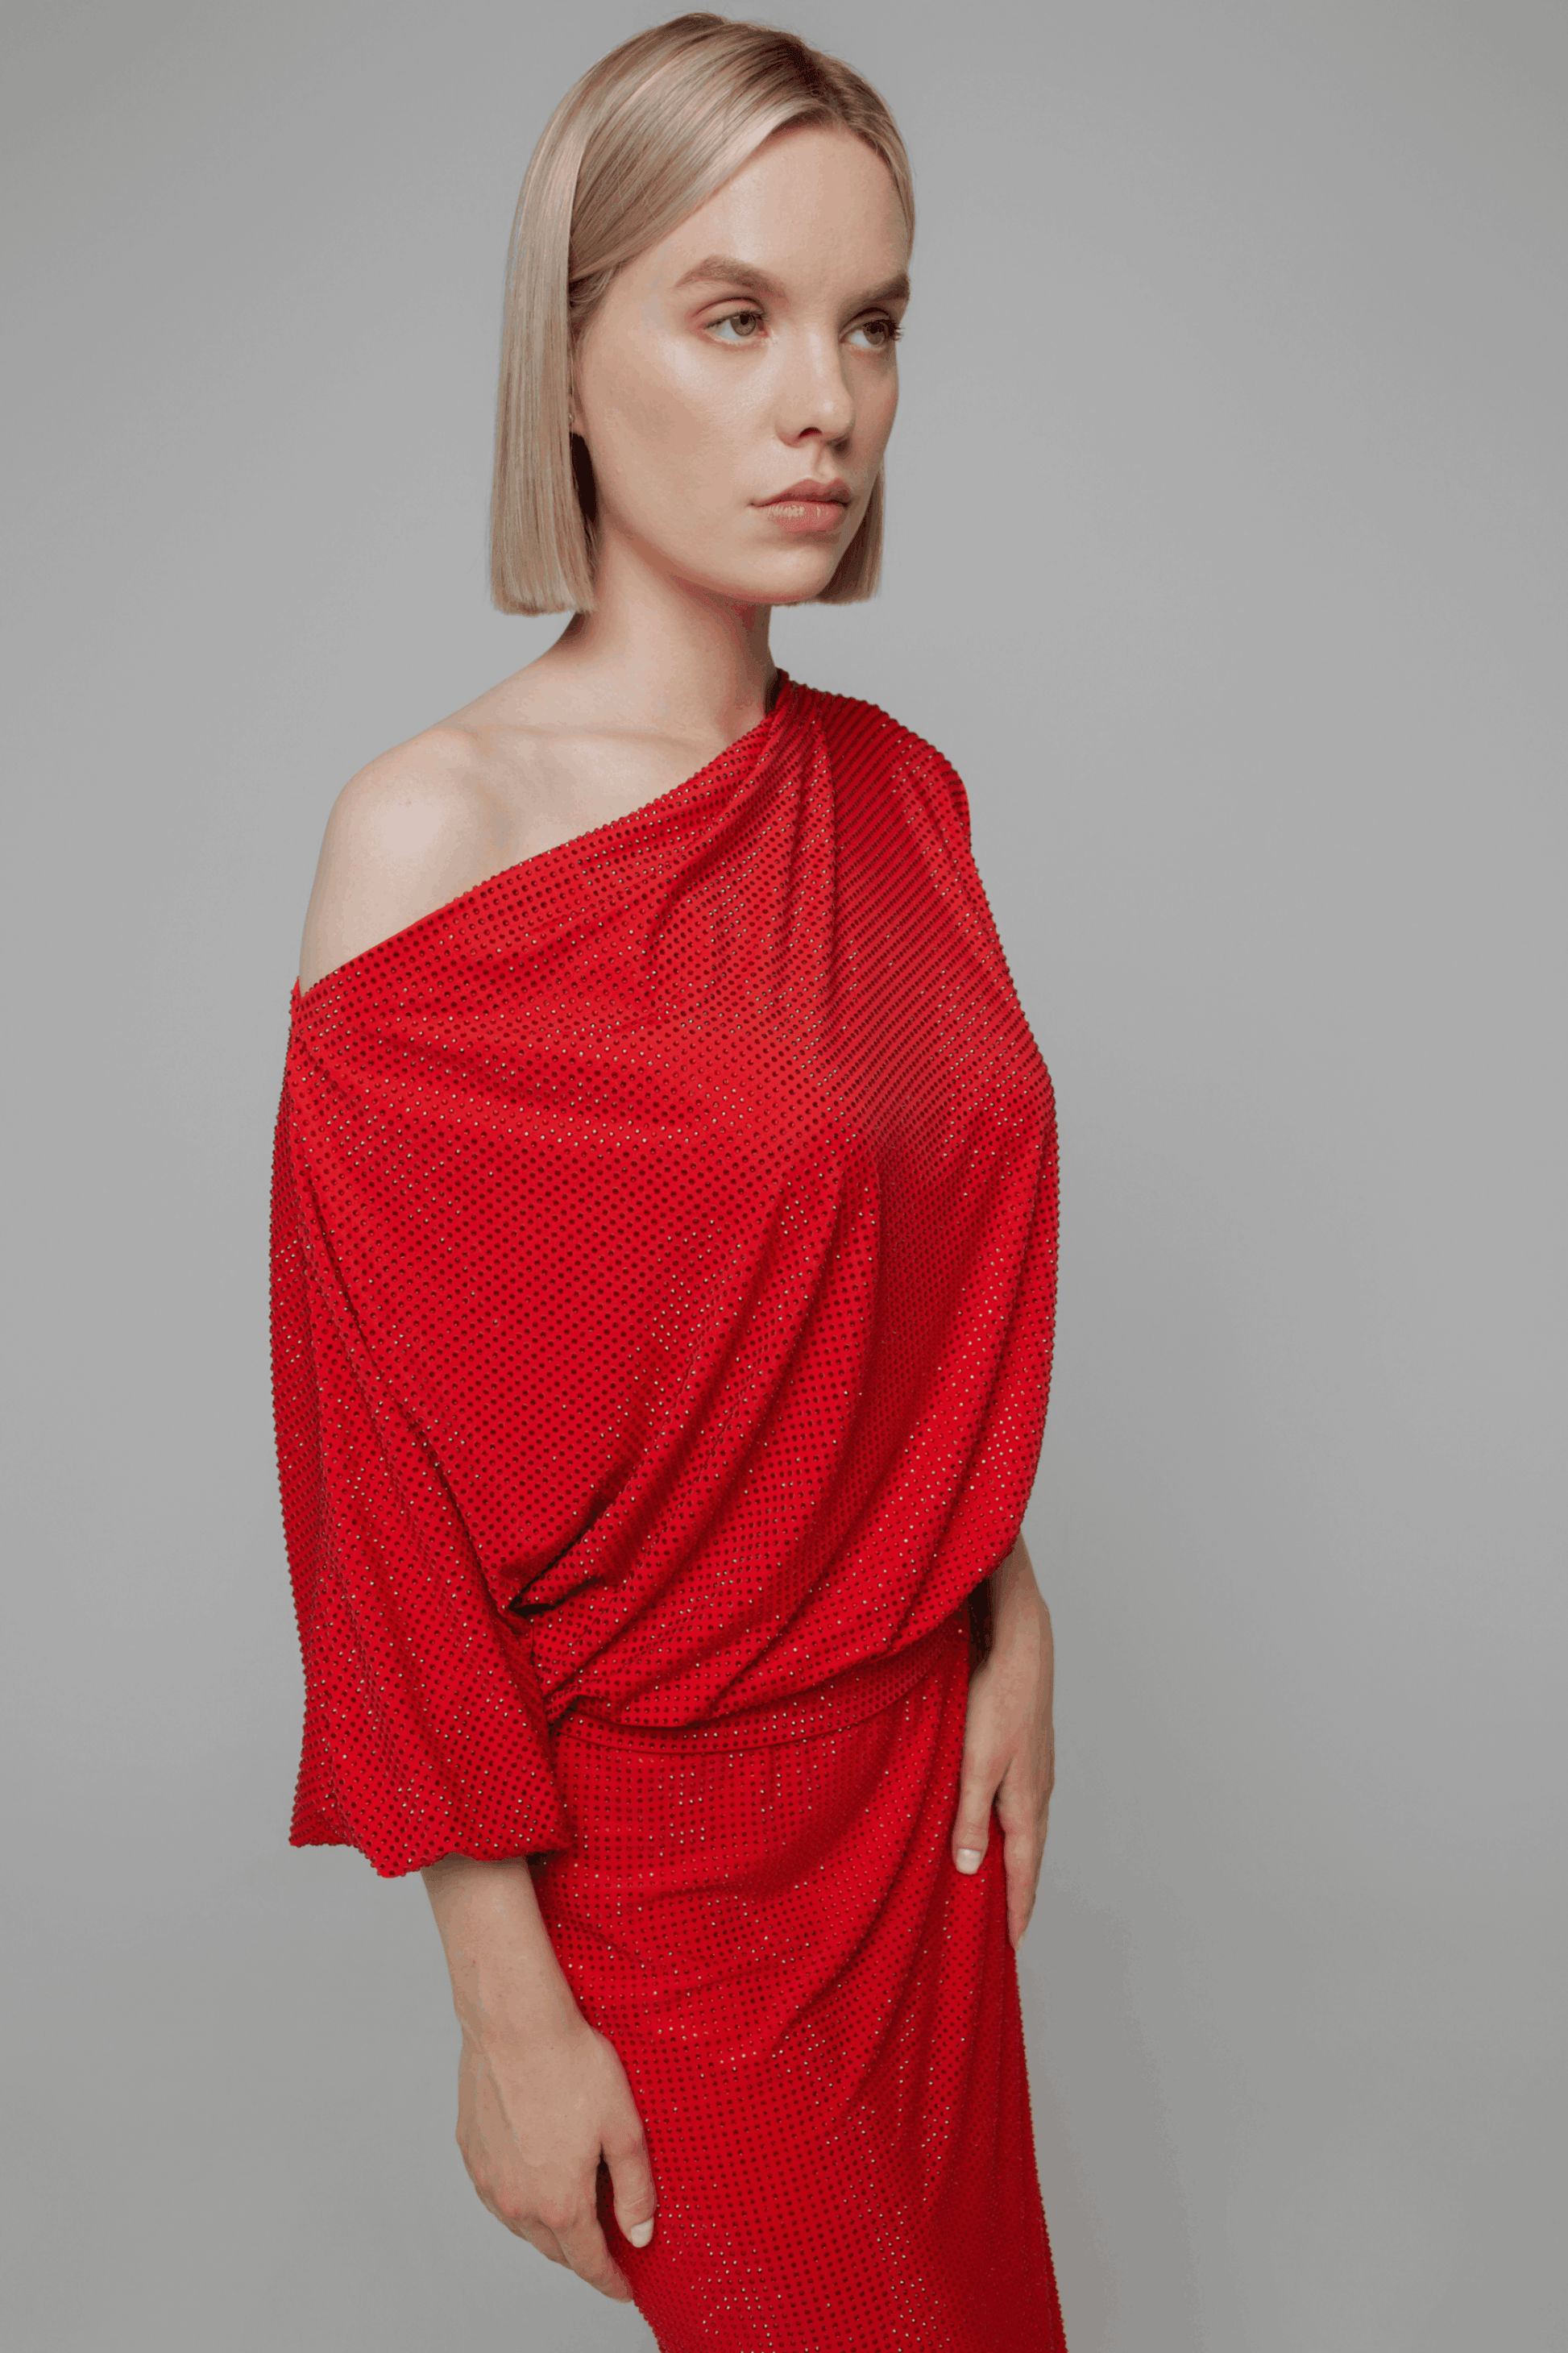 Exquisite detail of Axinia Crystal Cowlneck Three Quarter Dolman Sleeves showcasing the fine craftsmanship and elegant design characteristic of Axinia Collection 's luxury collection.